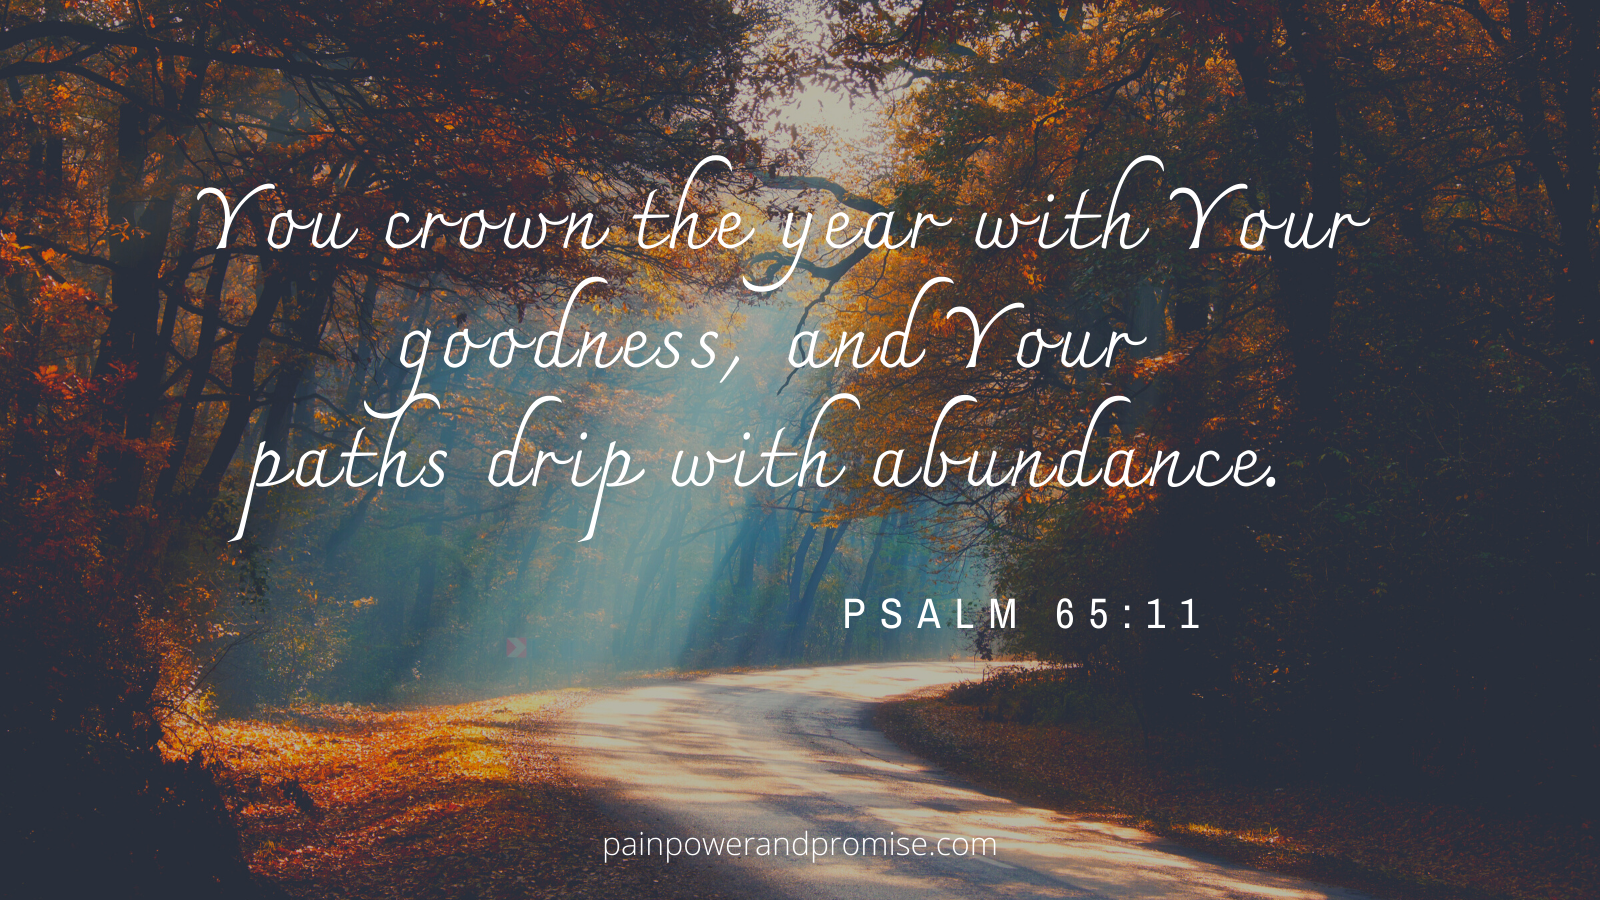 You crown the year with your goodness. And your paths drip with abundance.